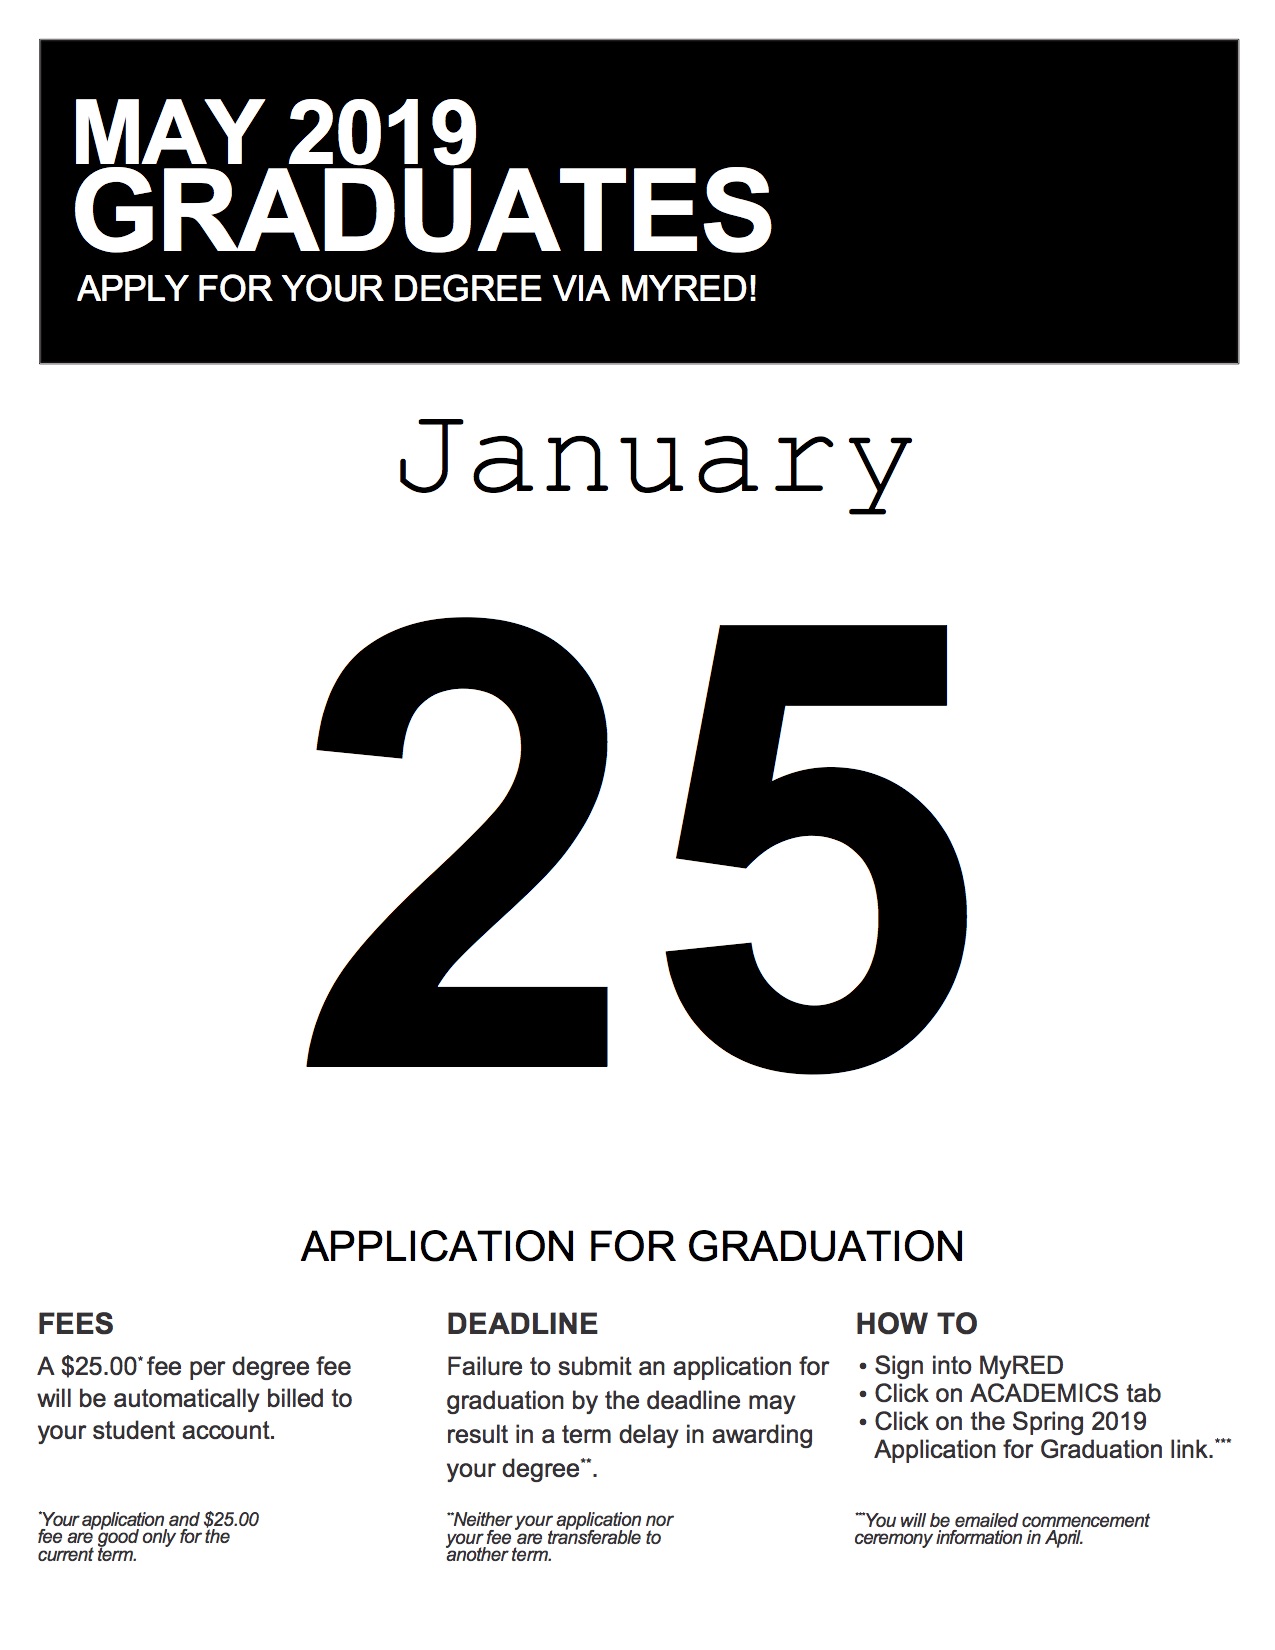 Submit your May 2019 graduation application by Jan. 25.